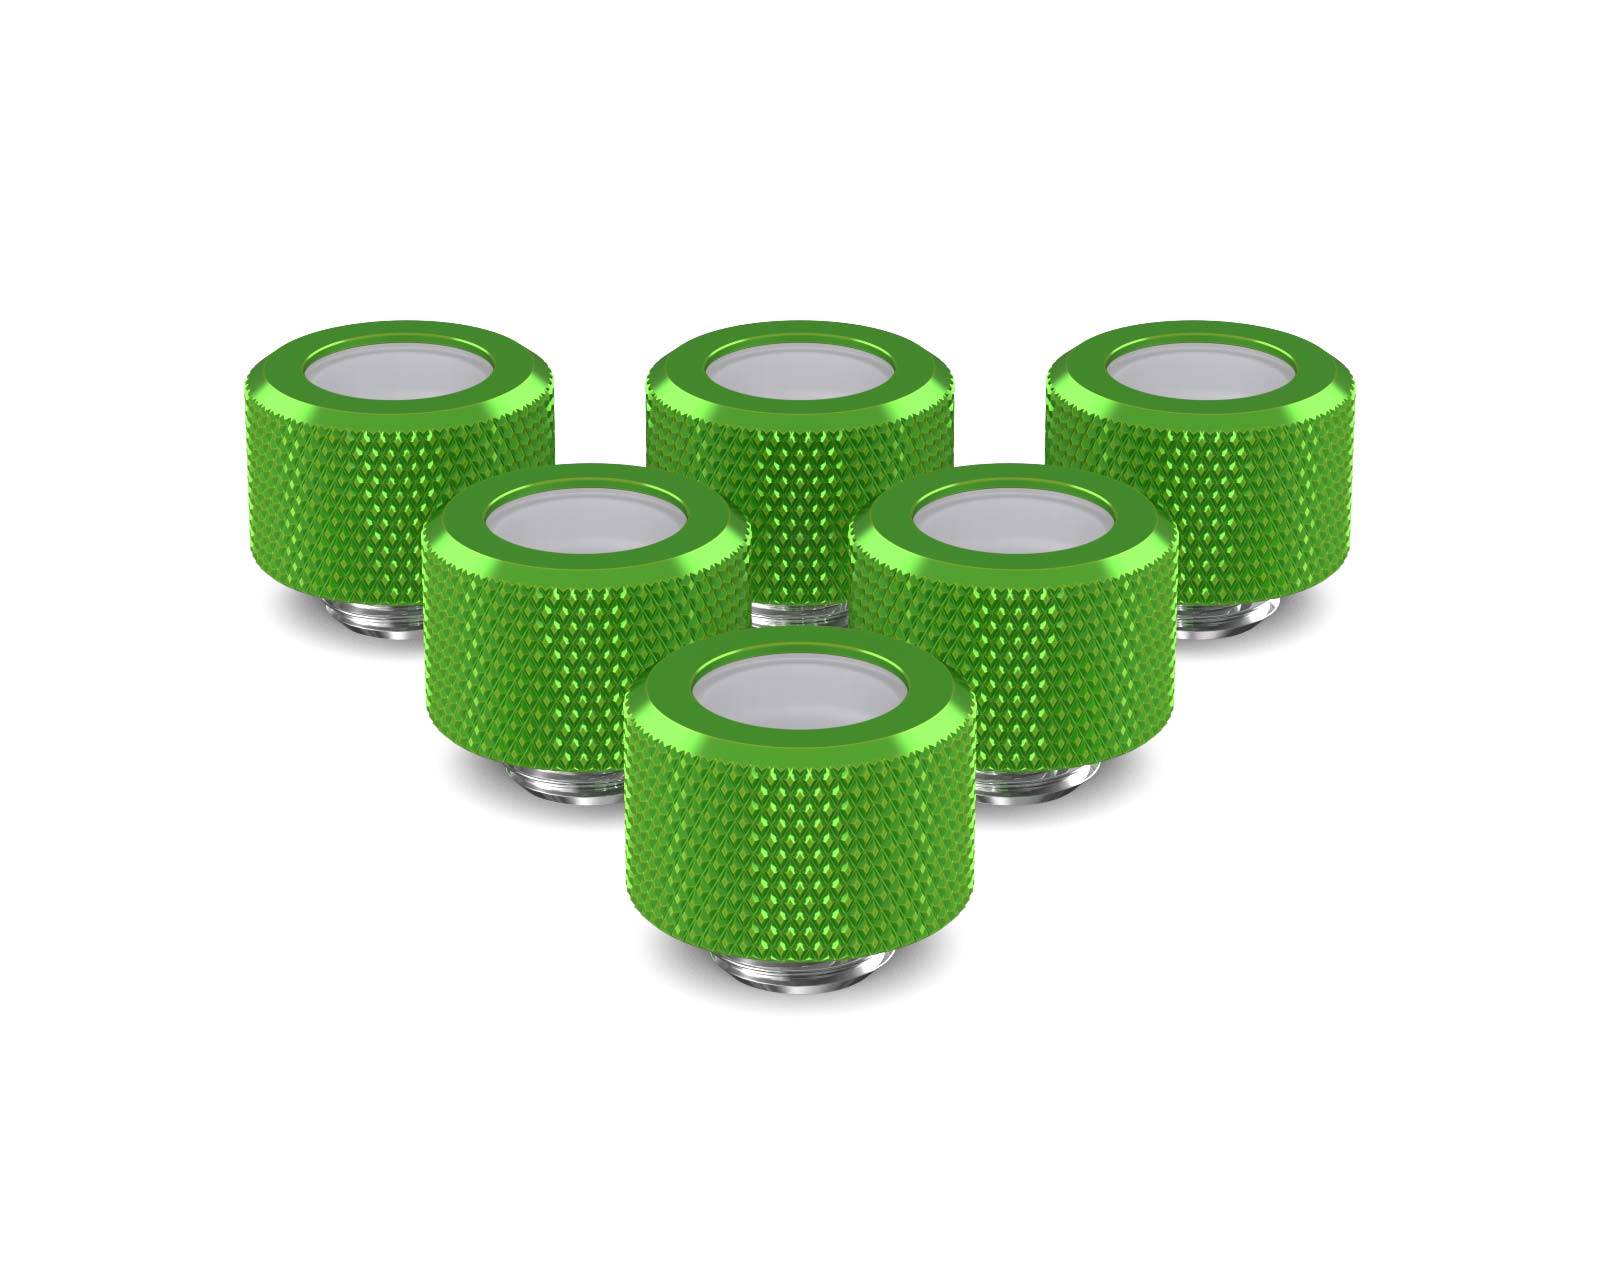 PrimoChill 14mm OD Rigid SX Fitting - 6 Pack - PrimoChill - KEEPING IT COOL Toxic Candy